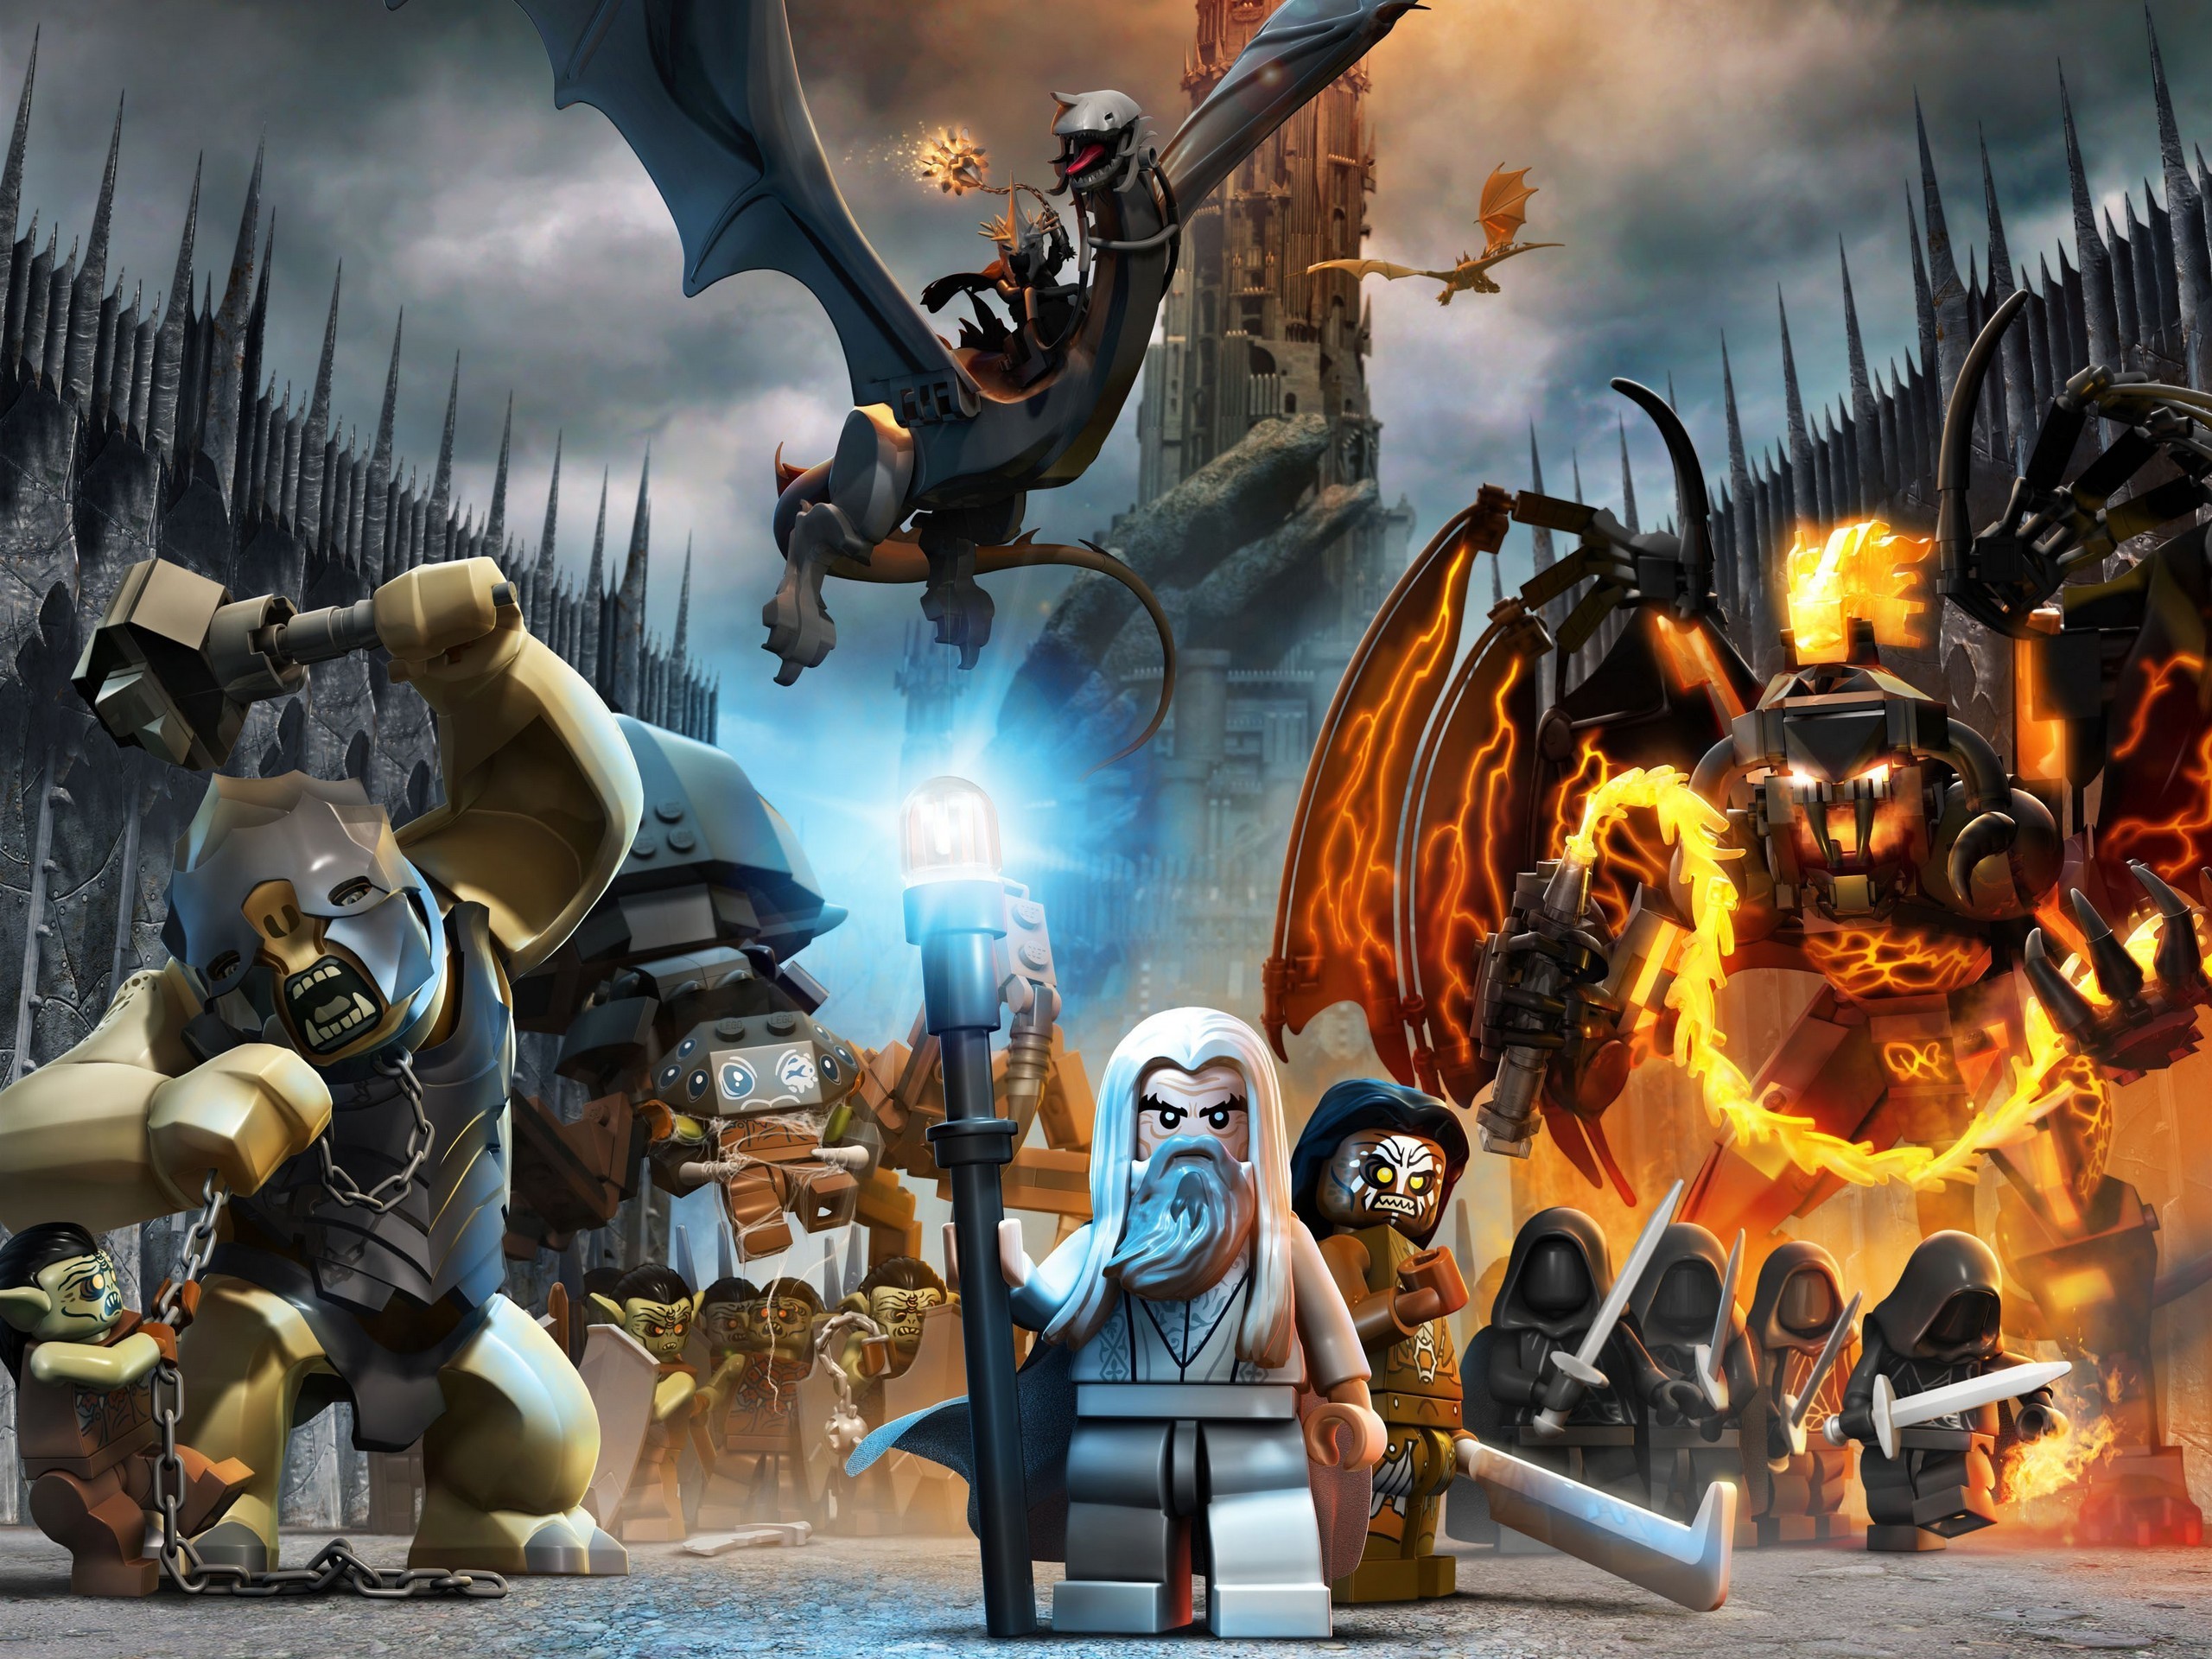 General 2560x1920 LEGO The Lord of the Rings video games LEGO Lord of the Rings Saruman toys staff Book characters